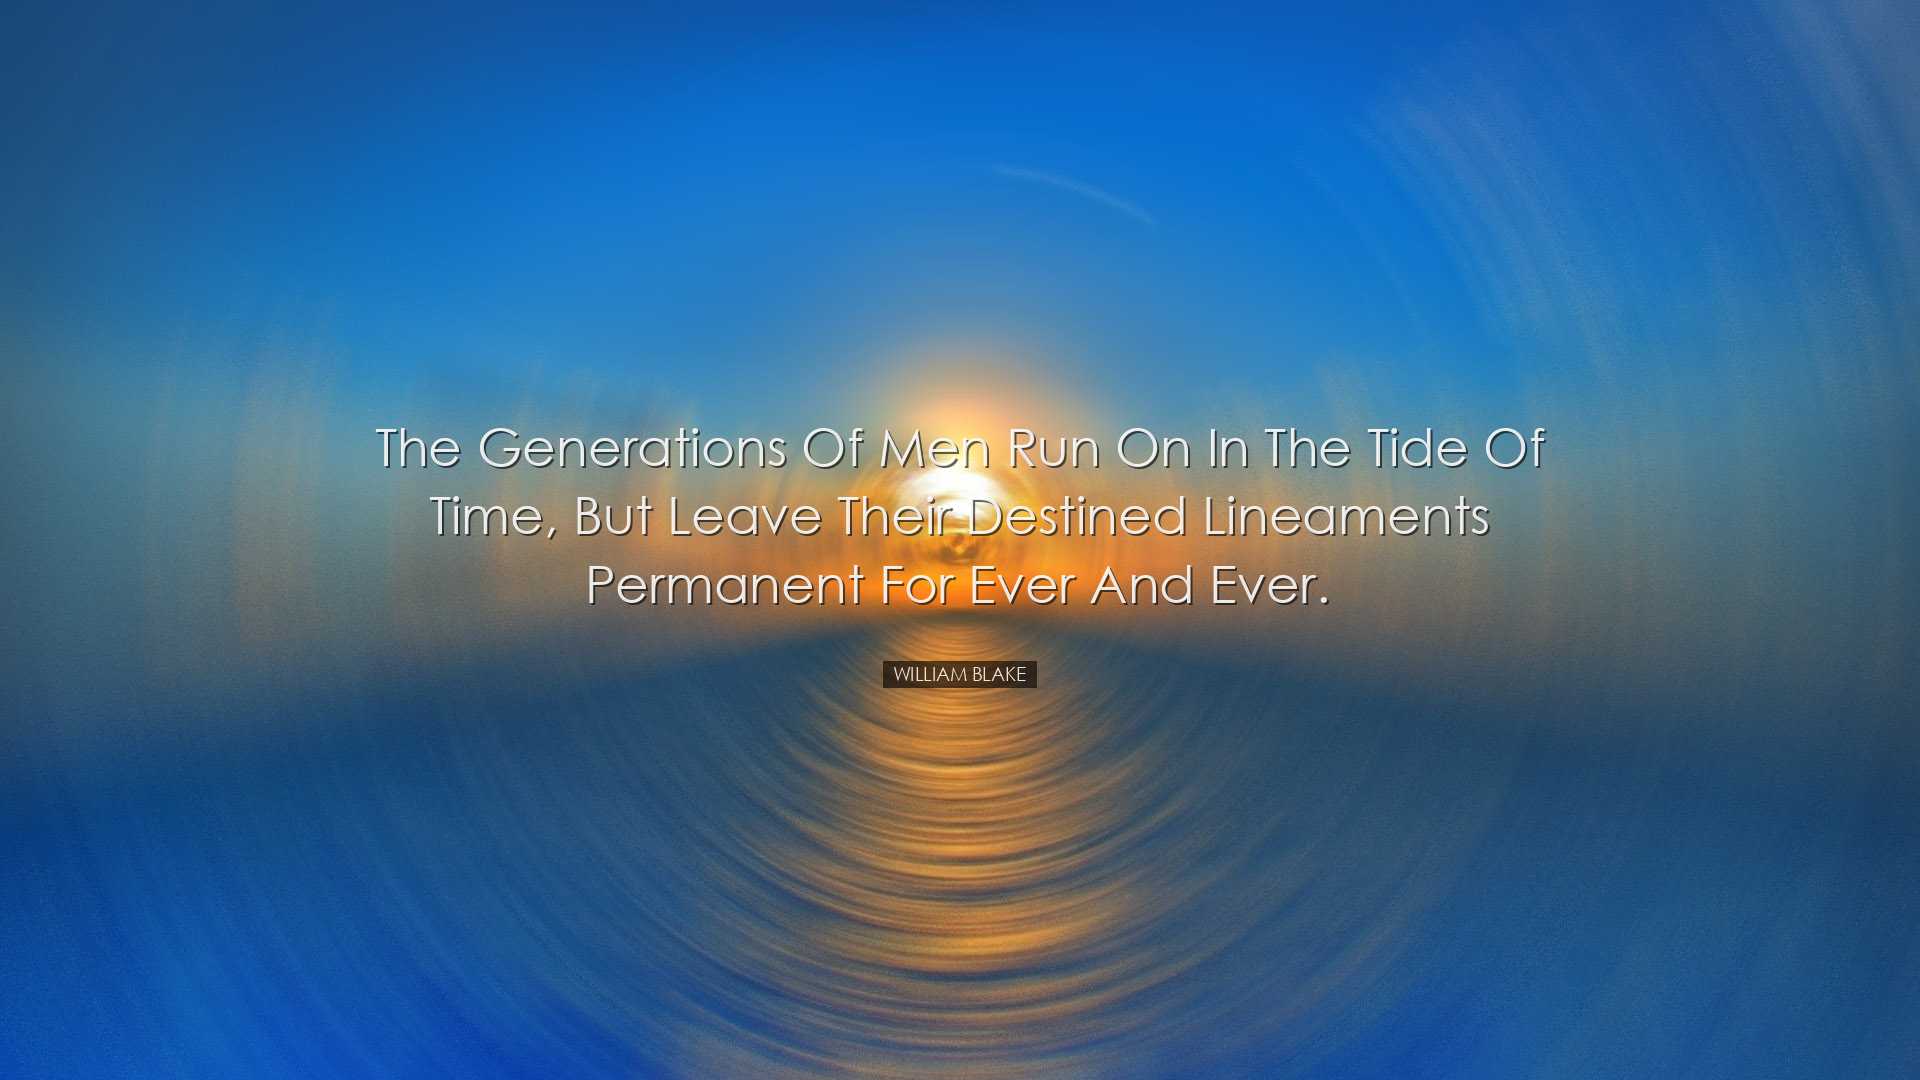 The generations of men run on in the tide of time, but leave their